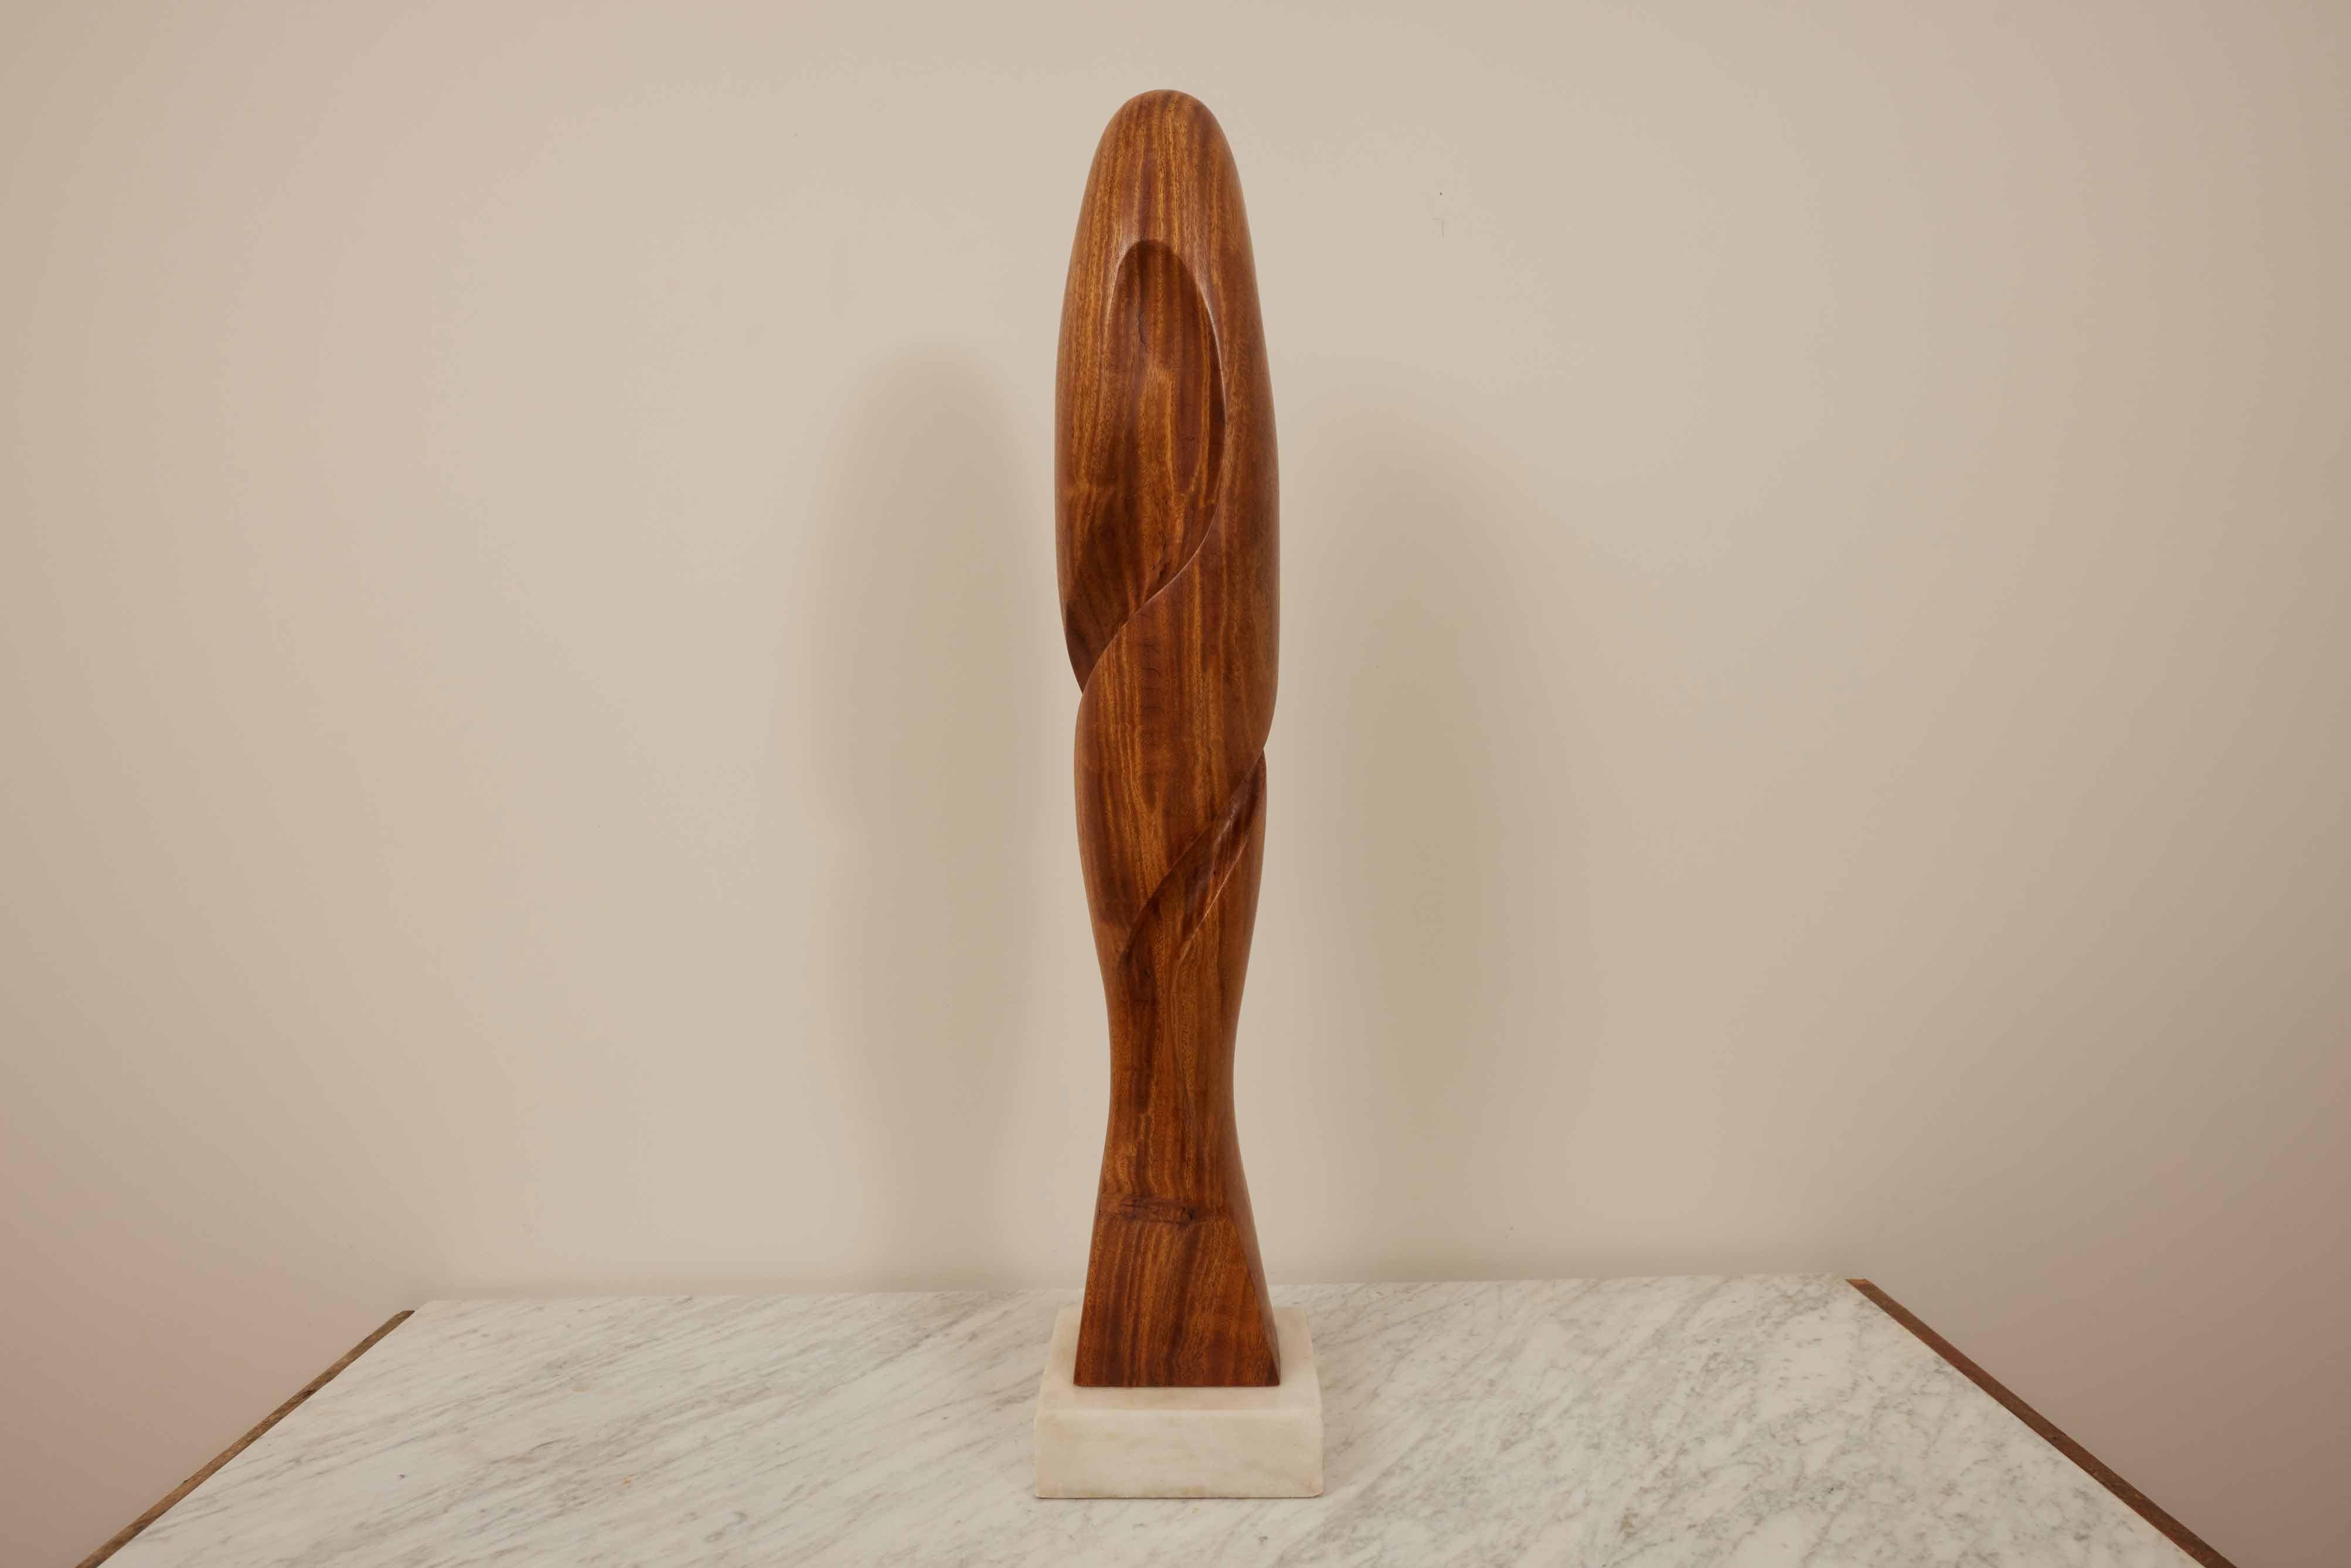  Henry Moretti Mahogany Sculpture  1970s For Sale 2